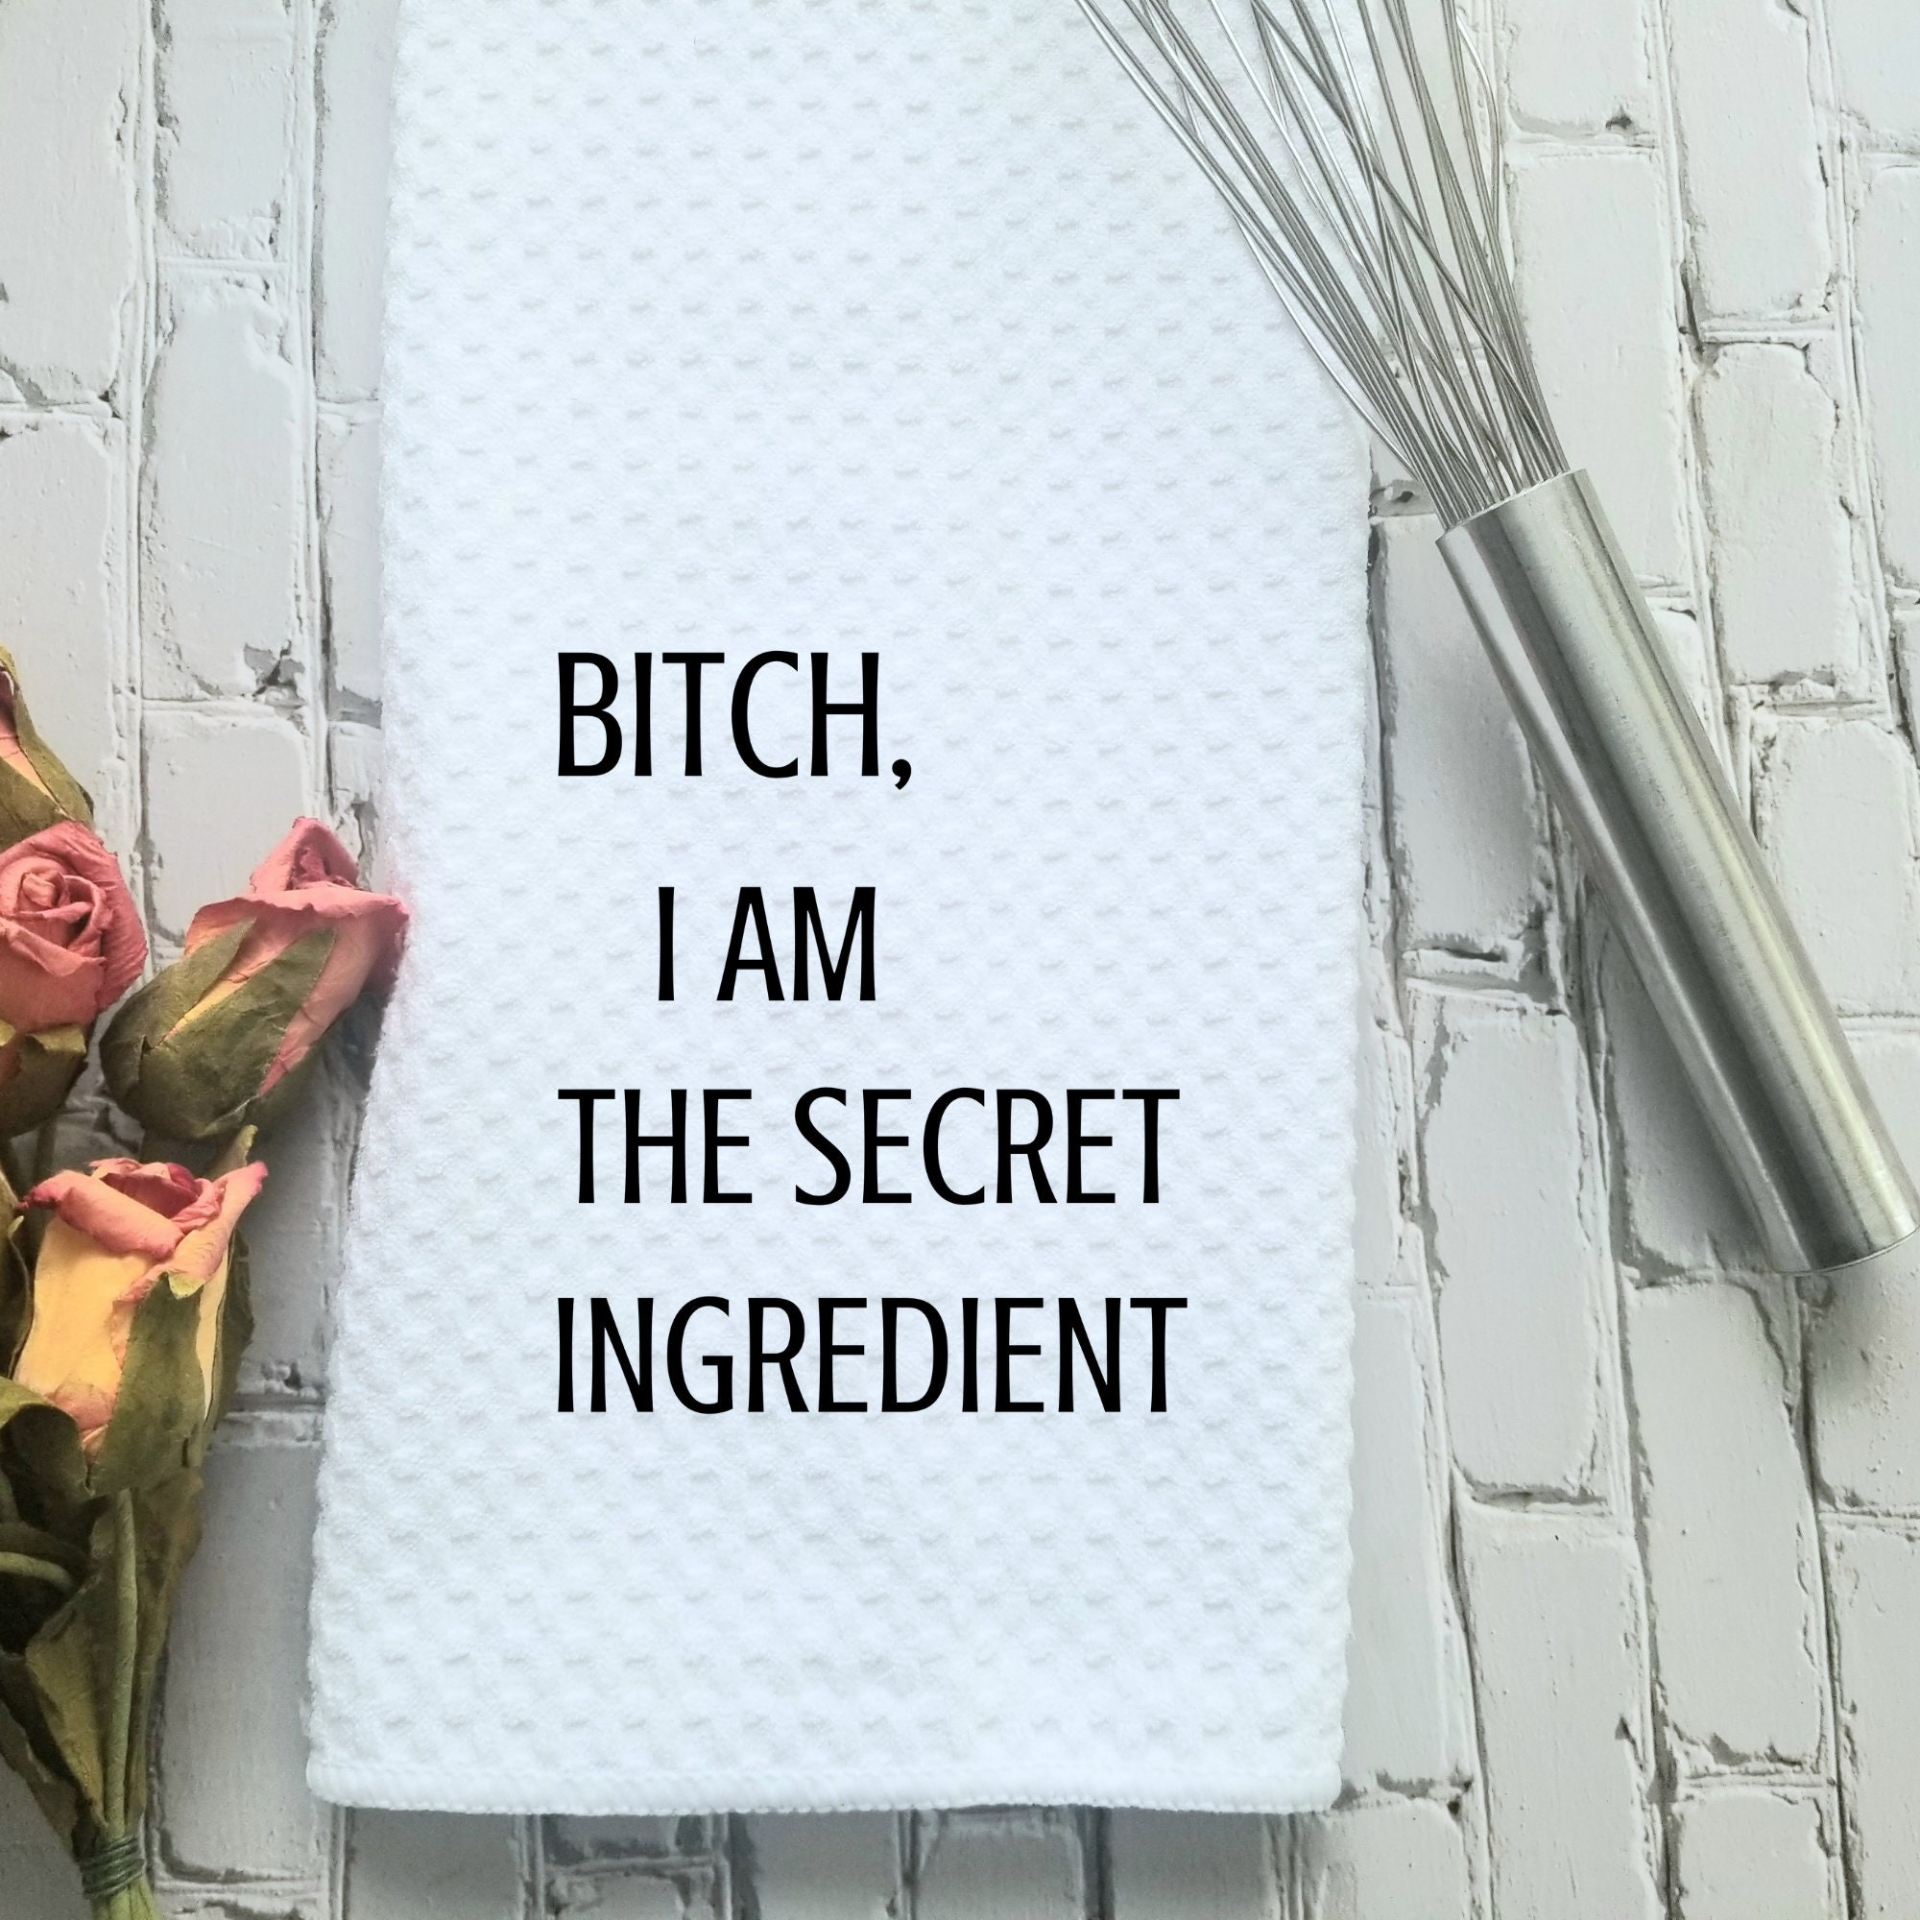 Bitch I Am the Secret Ingredient Funny Kitchen Towel Sayings | Farmhouse Sarcastic Dish Towel with Quote | Hand Towel Gift for Cook, Goodies N Stuff